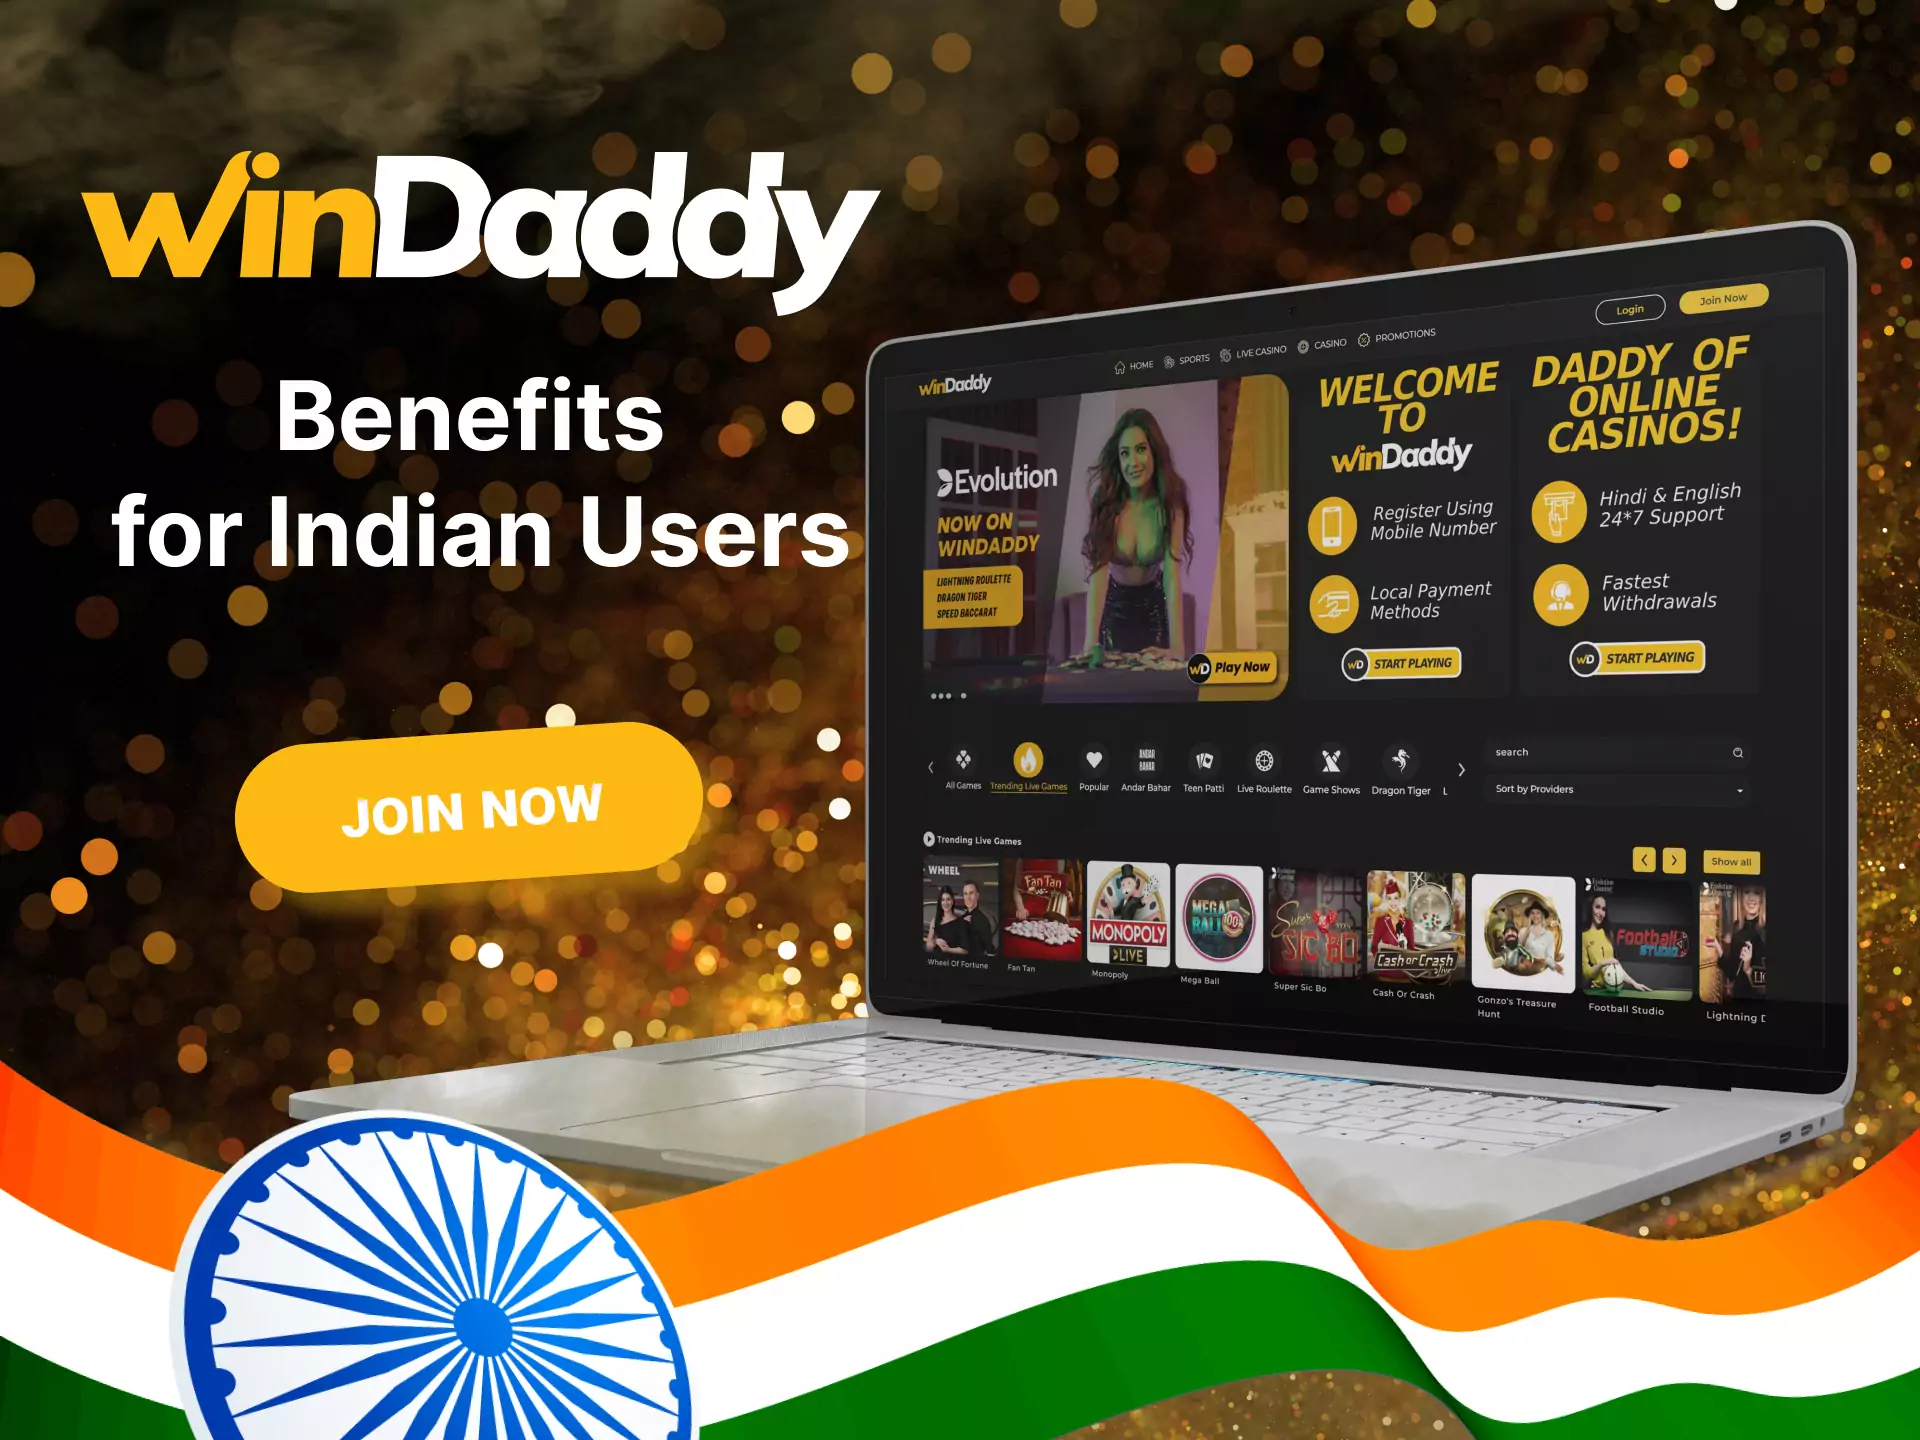 The Windaddy platform has many bonuses and benefits for players from India.